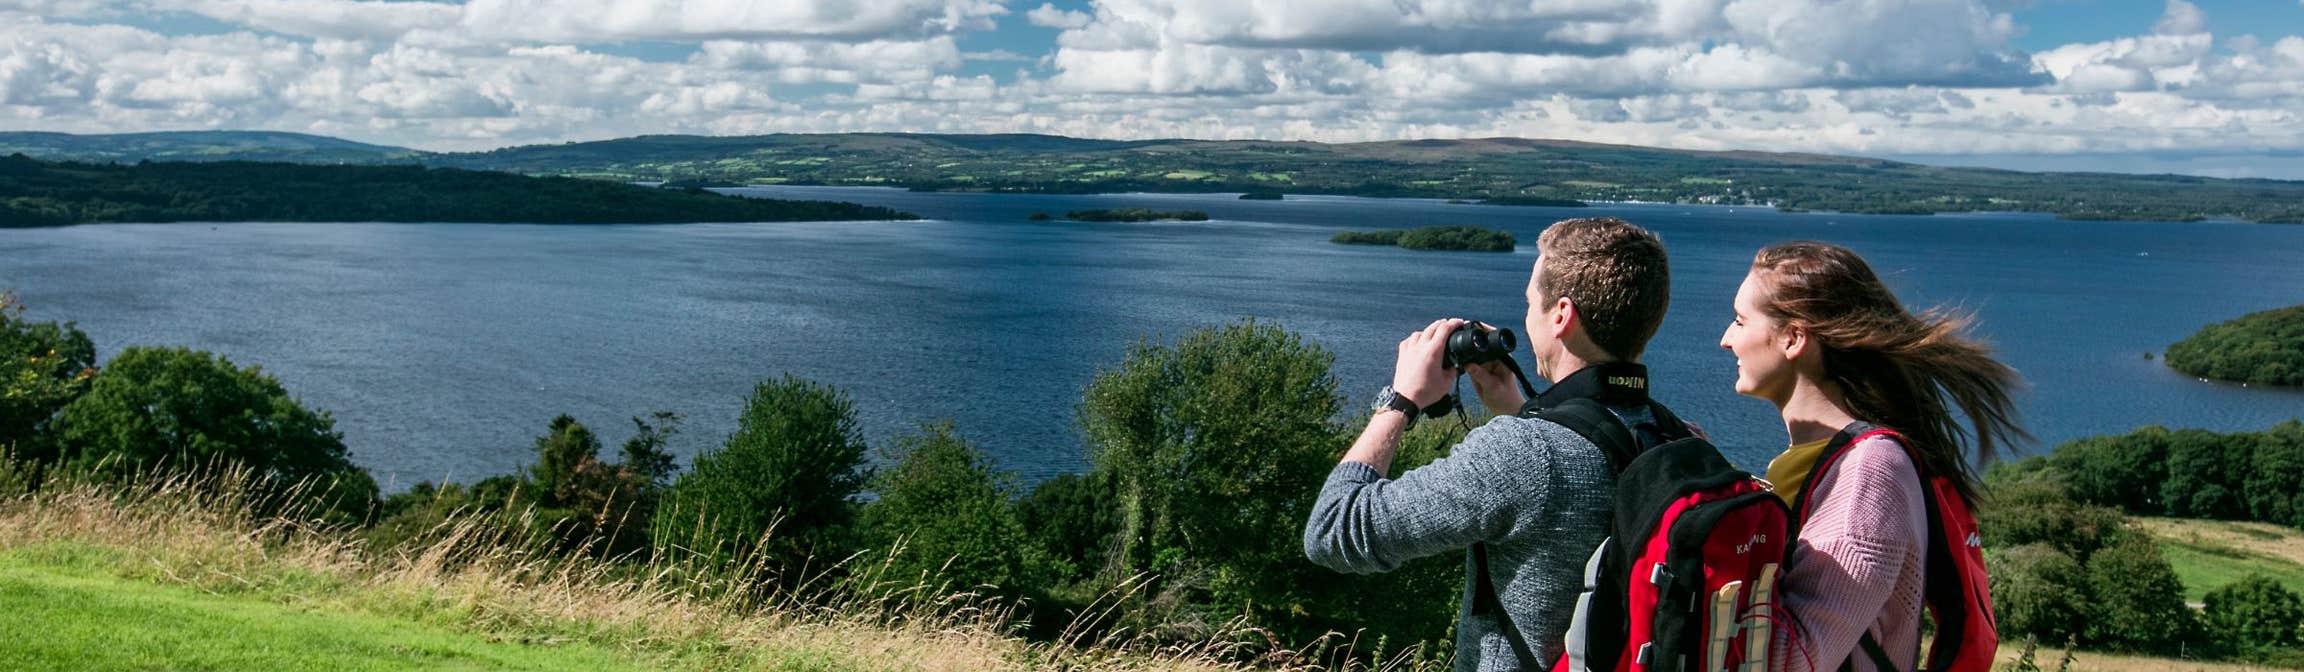 Two people taking photos and admiring the scenery of Lough Derg